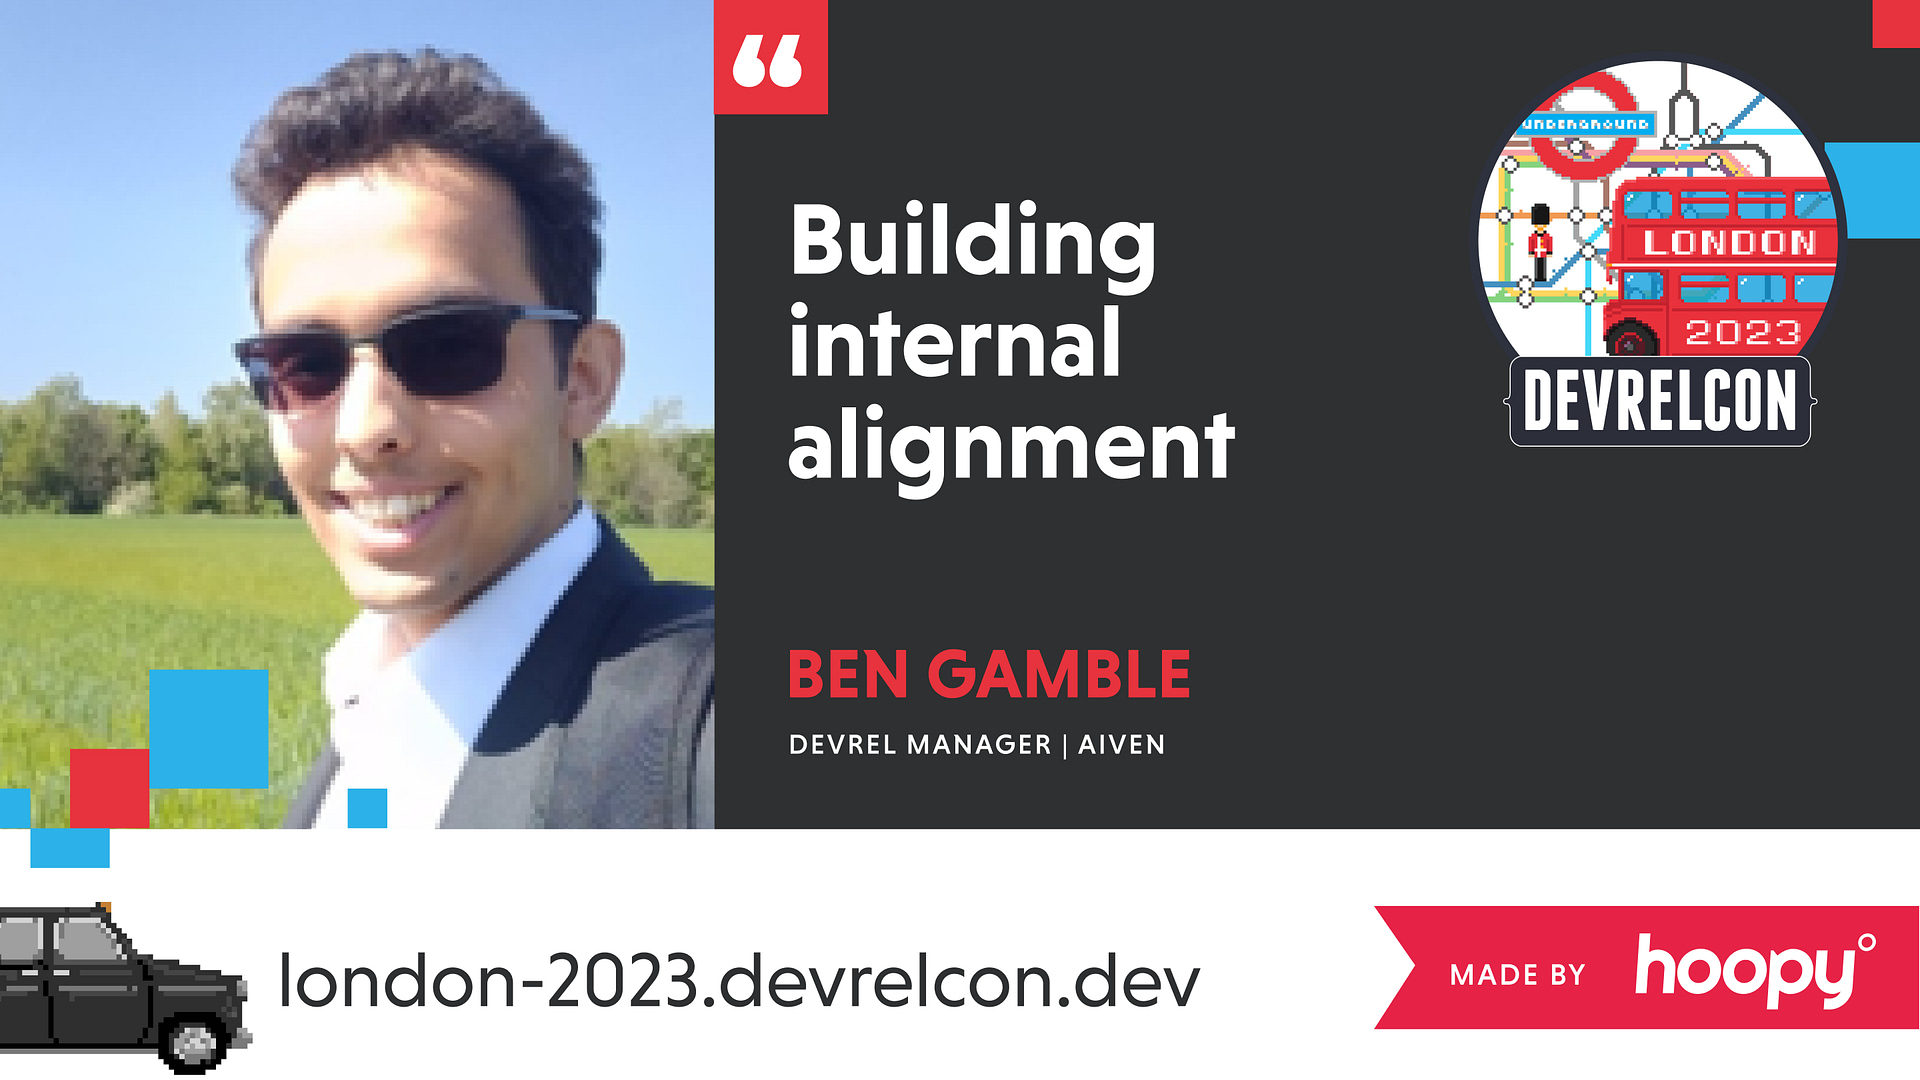 The image is a promotional banner for a speaker at a conference. It features a smiling man wearing sunglasses named Ben Gamble, who is listed as a DevRel Manager at Aiven. He will be presenting on "Building internal alignment" at DEVRELCON in London, 2023. The graphic includes iconic London imagery such as the Underground sign and a red double-decker bus. There is also a black taxi graphic at the bottom, and the event's website address, london-2023.devrelcon.dev, is included. The banner indicates that it was made by Hoopy.